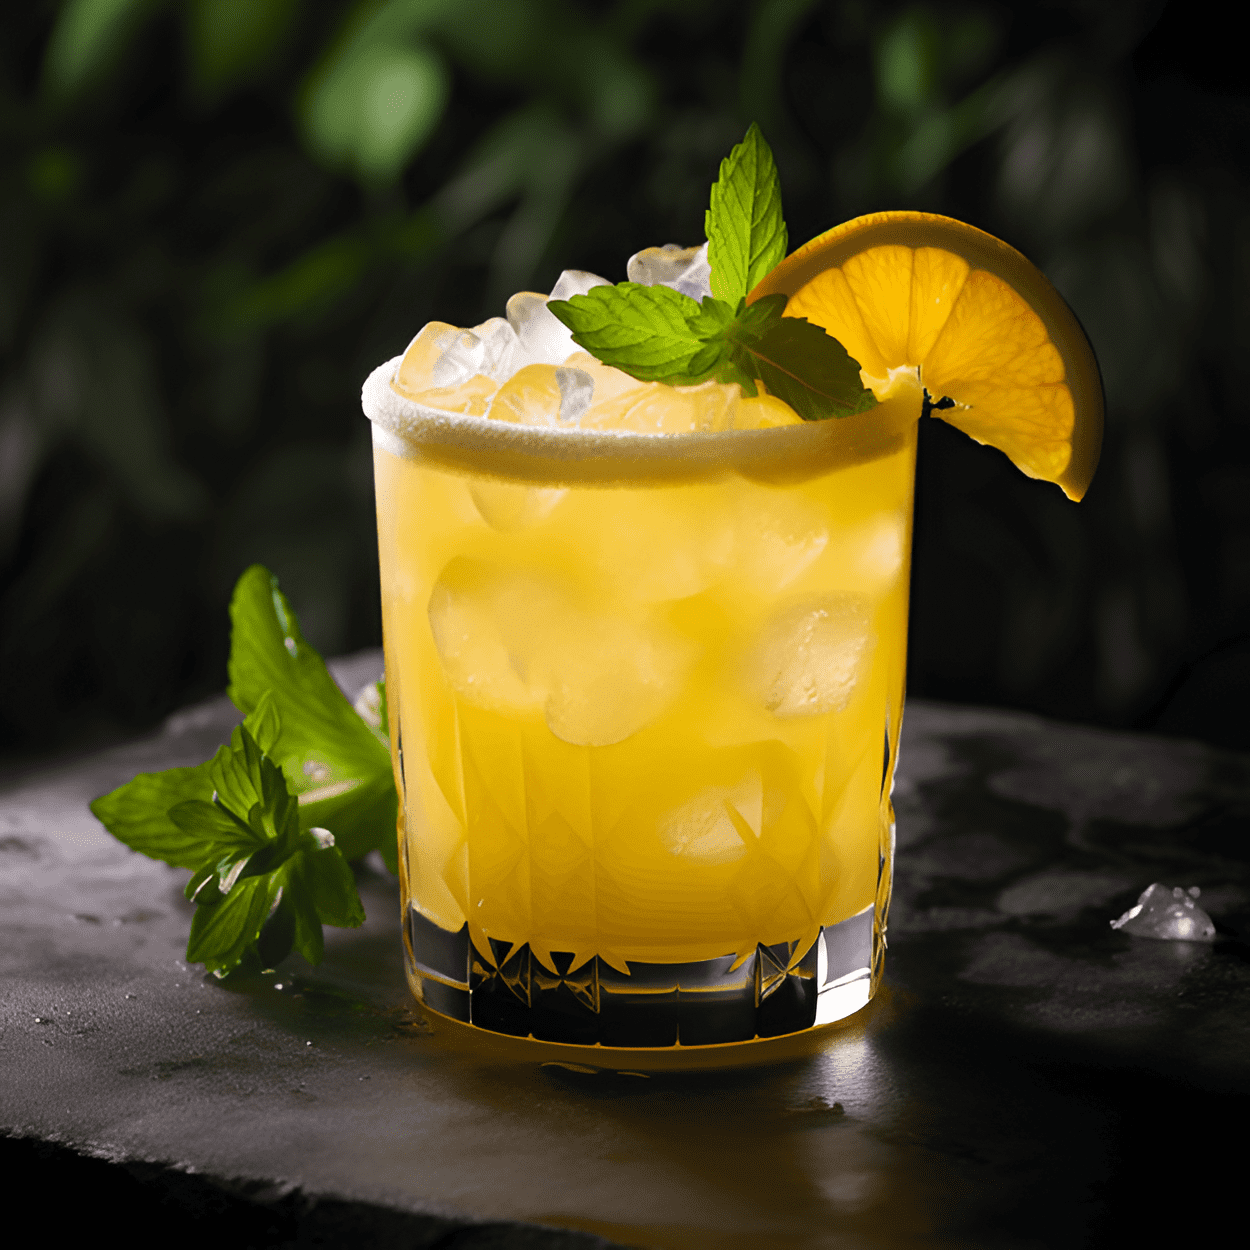 Daisy Cocktail Recipe - The Daisy cocktail is a refreshing, citrusy, and slightly sweet drink with a hint of tartness. It has a well-balanced flavor profile that is both light and invigorating, making it perfect for warm weather or as an aperitif.